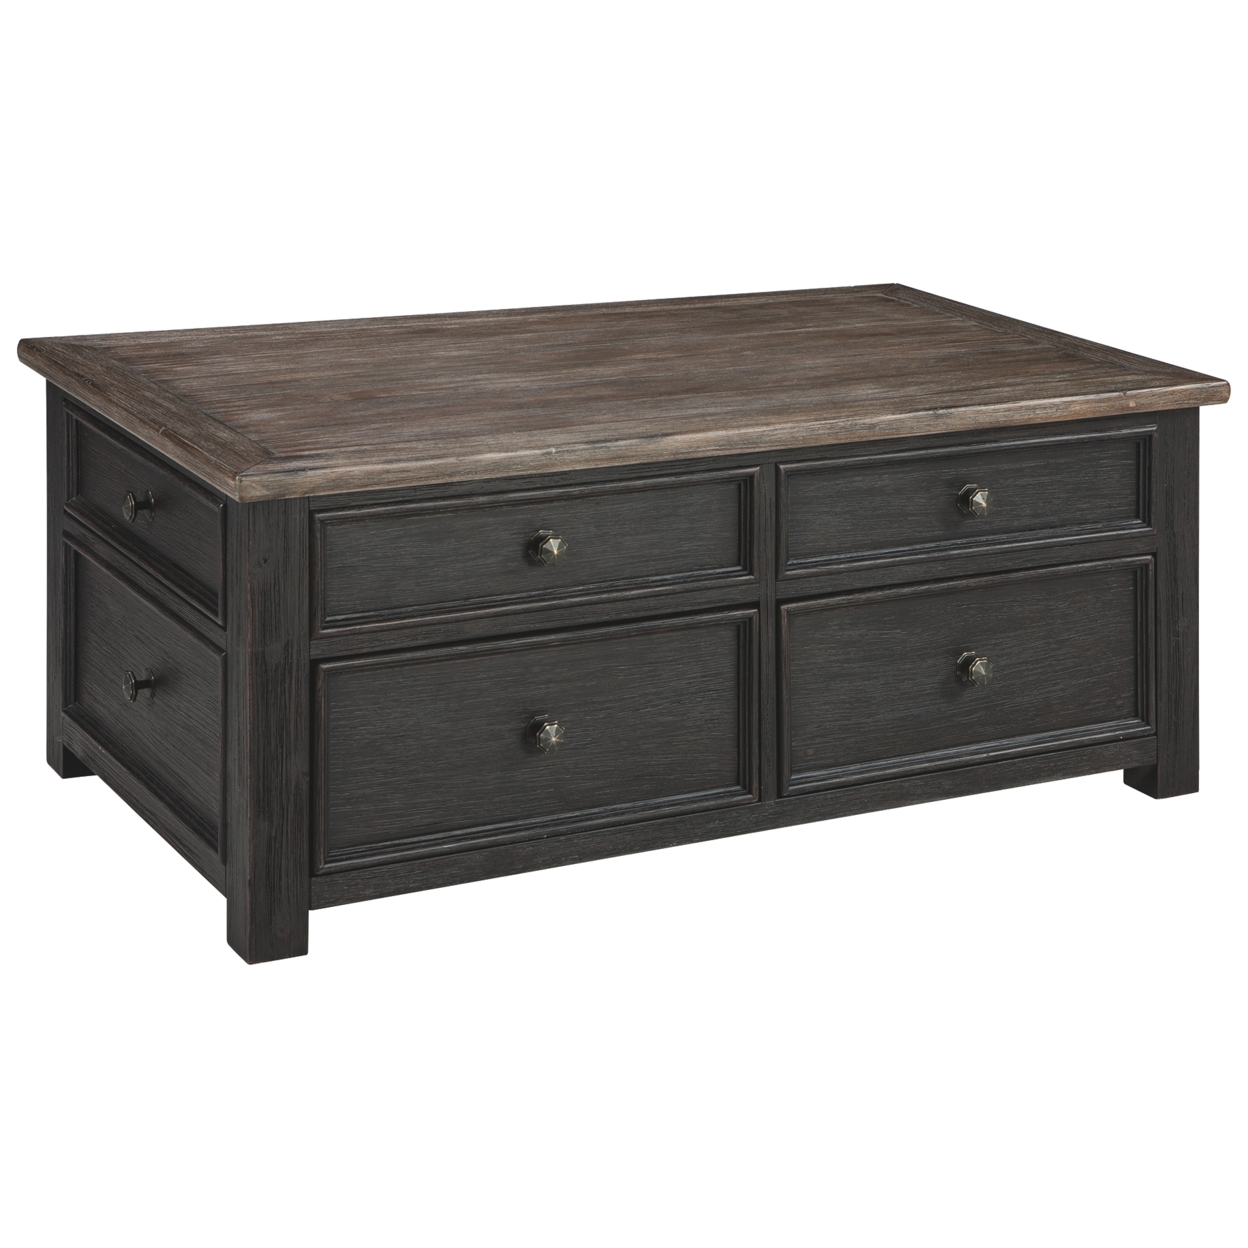 Wooden Lift Top Coffee Table With Drawers And Caster, Black And Brown- Saltoro Sherpi